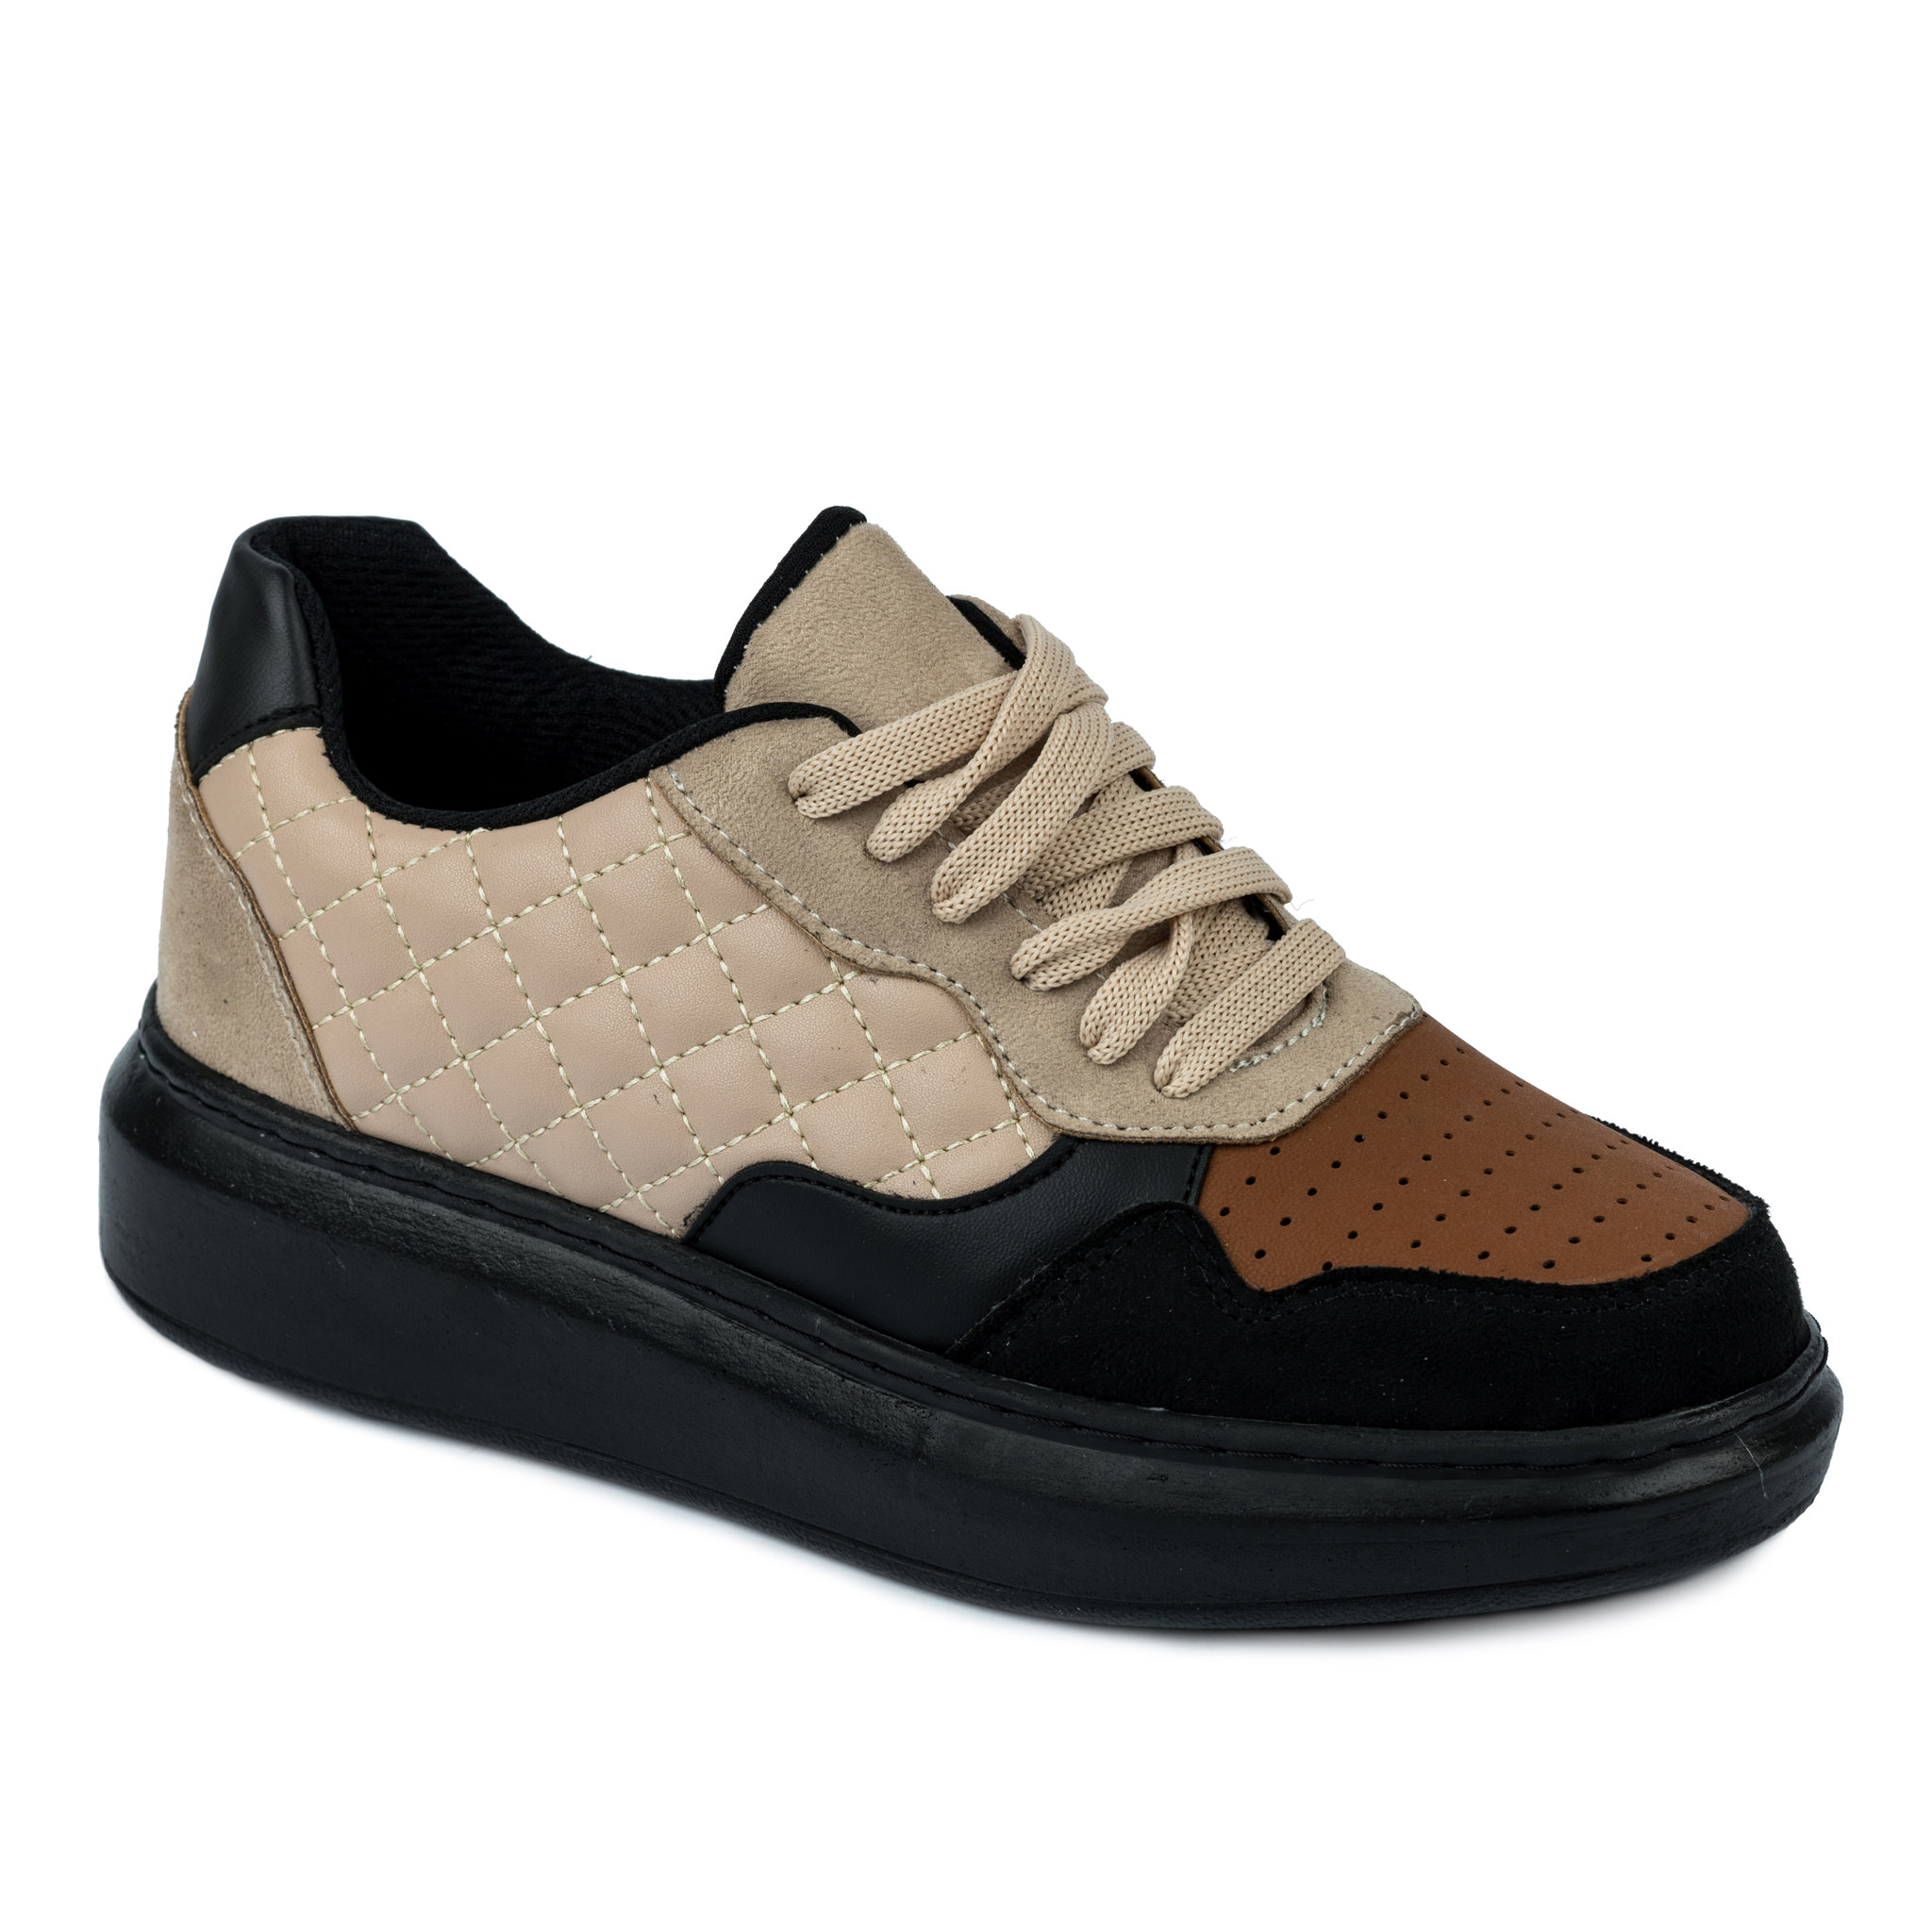 SAW SNEAKERS WITH HIGH SOLE - CAMEL/BLACK